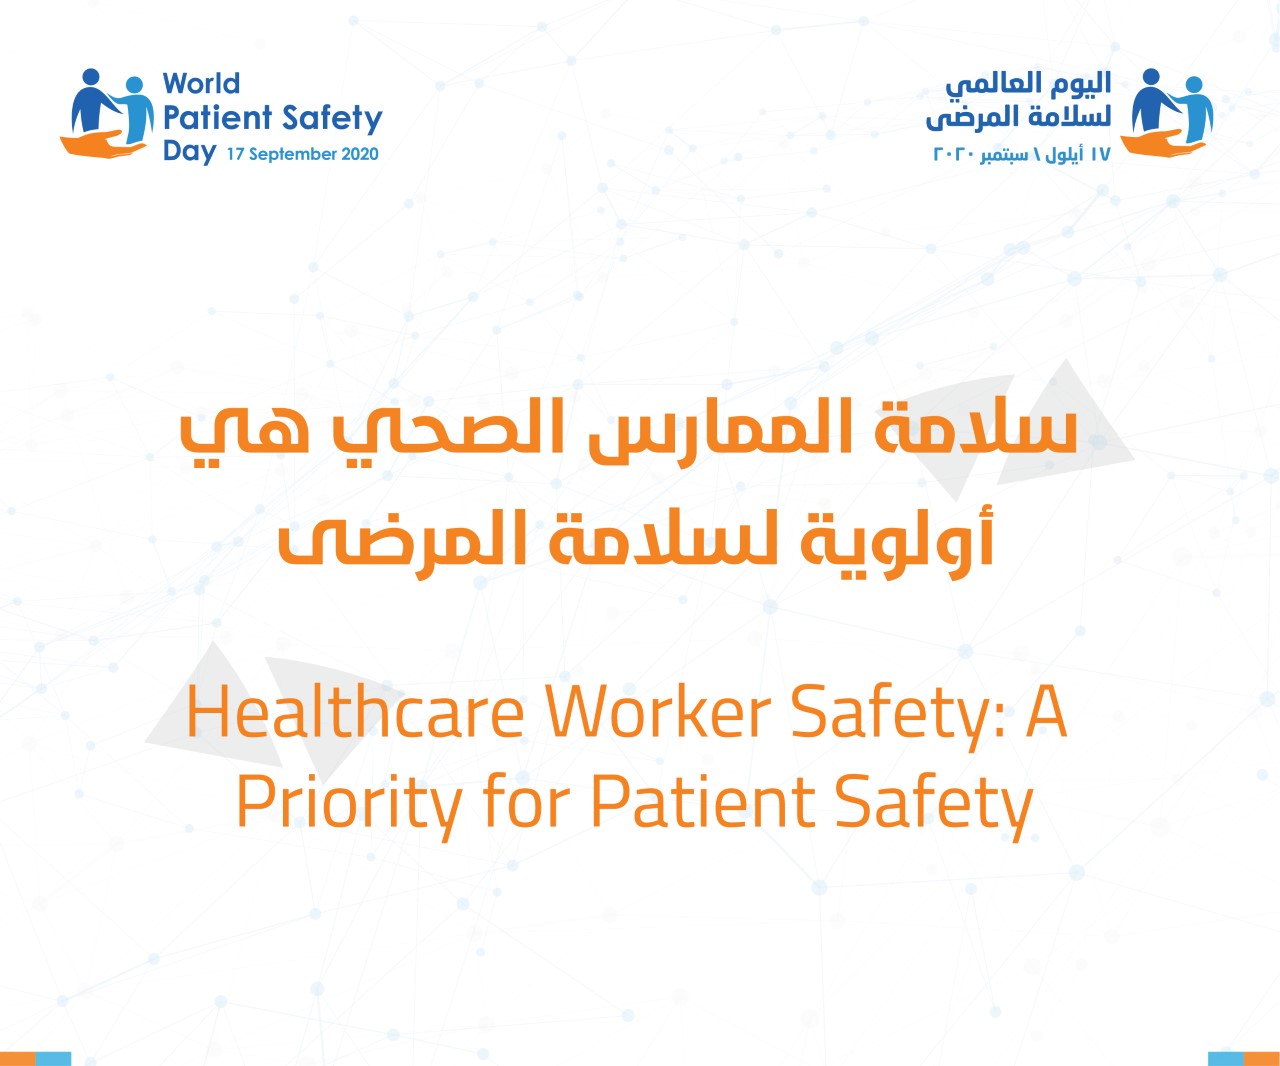 World Patient Safety Day 2020: Making Health Worker Safety a Priority for Patient Safety